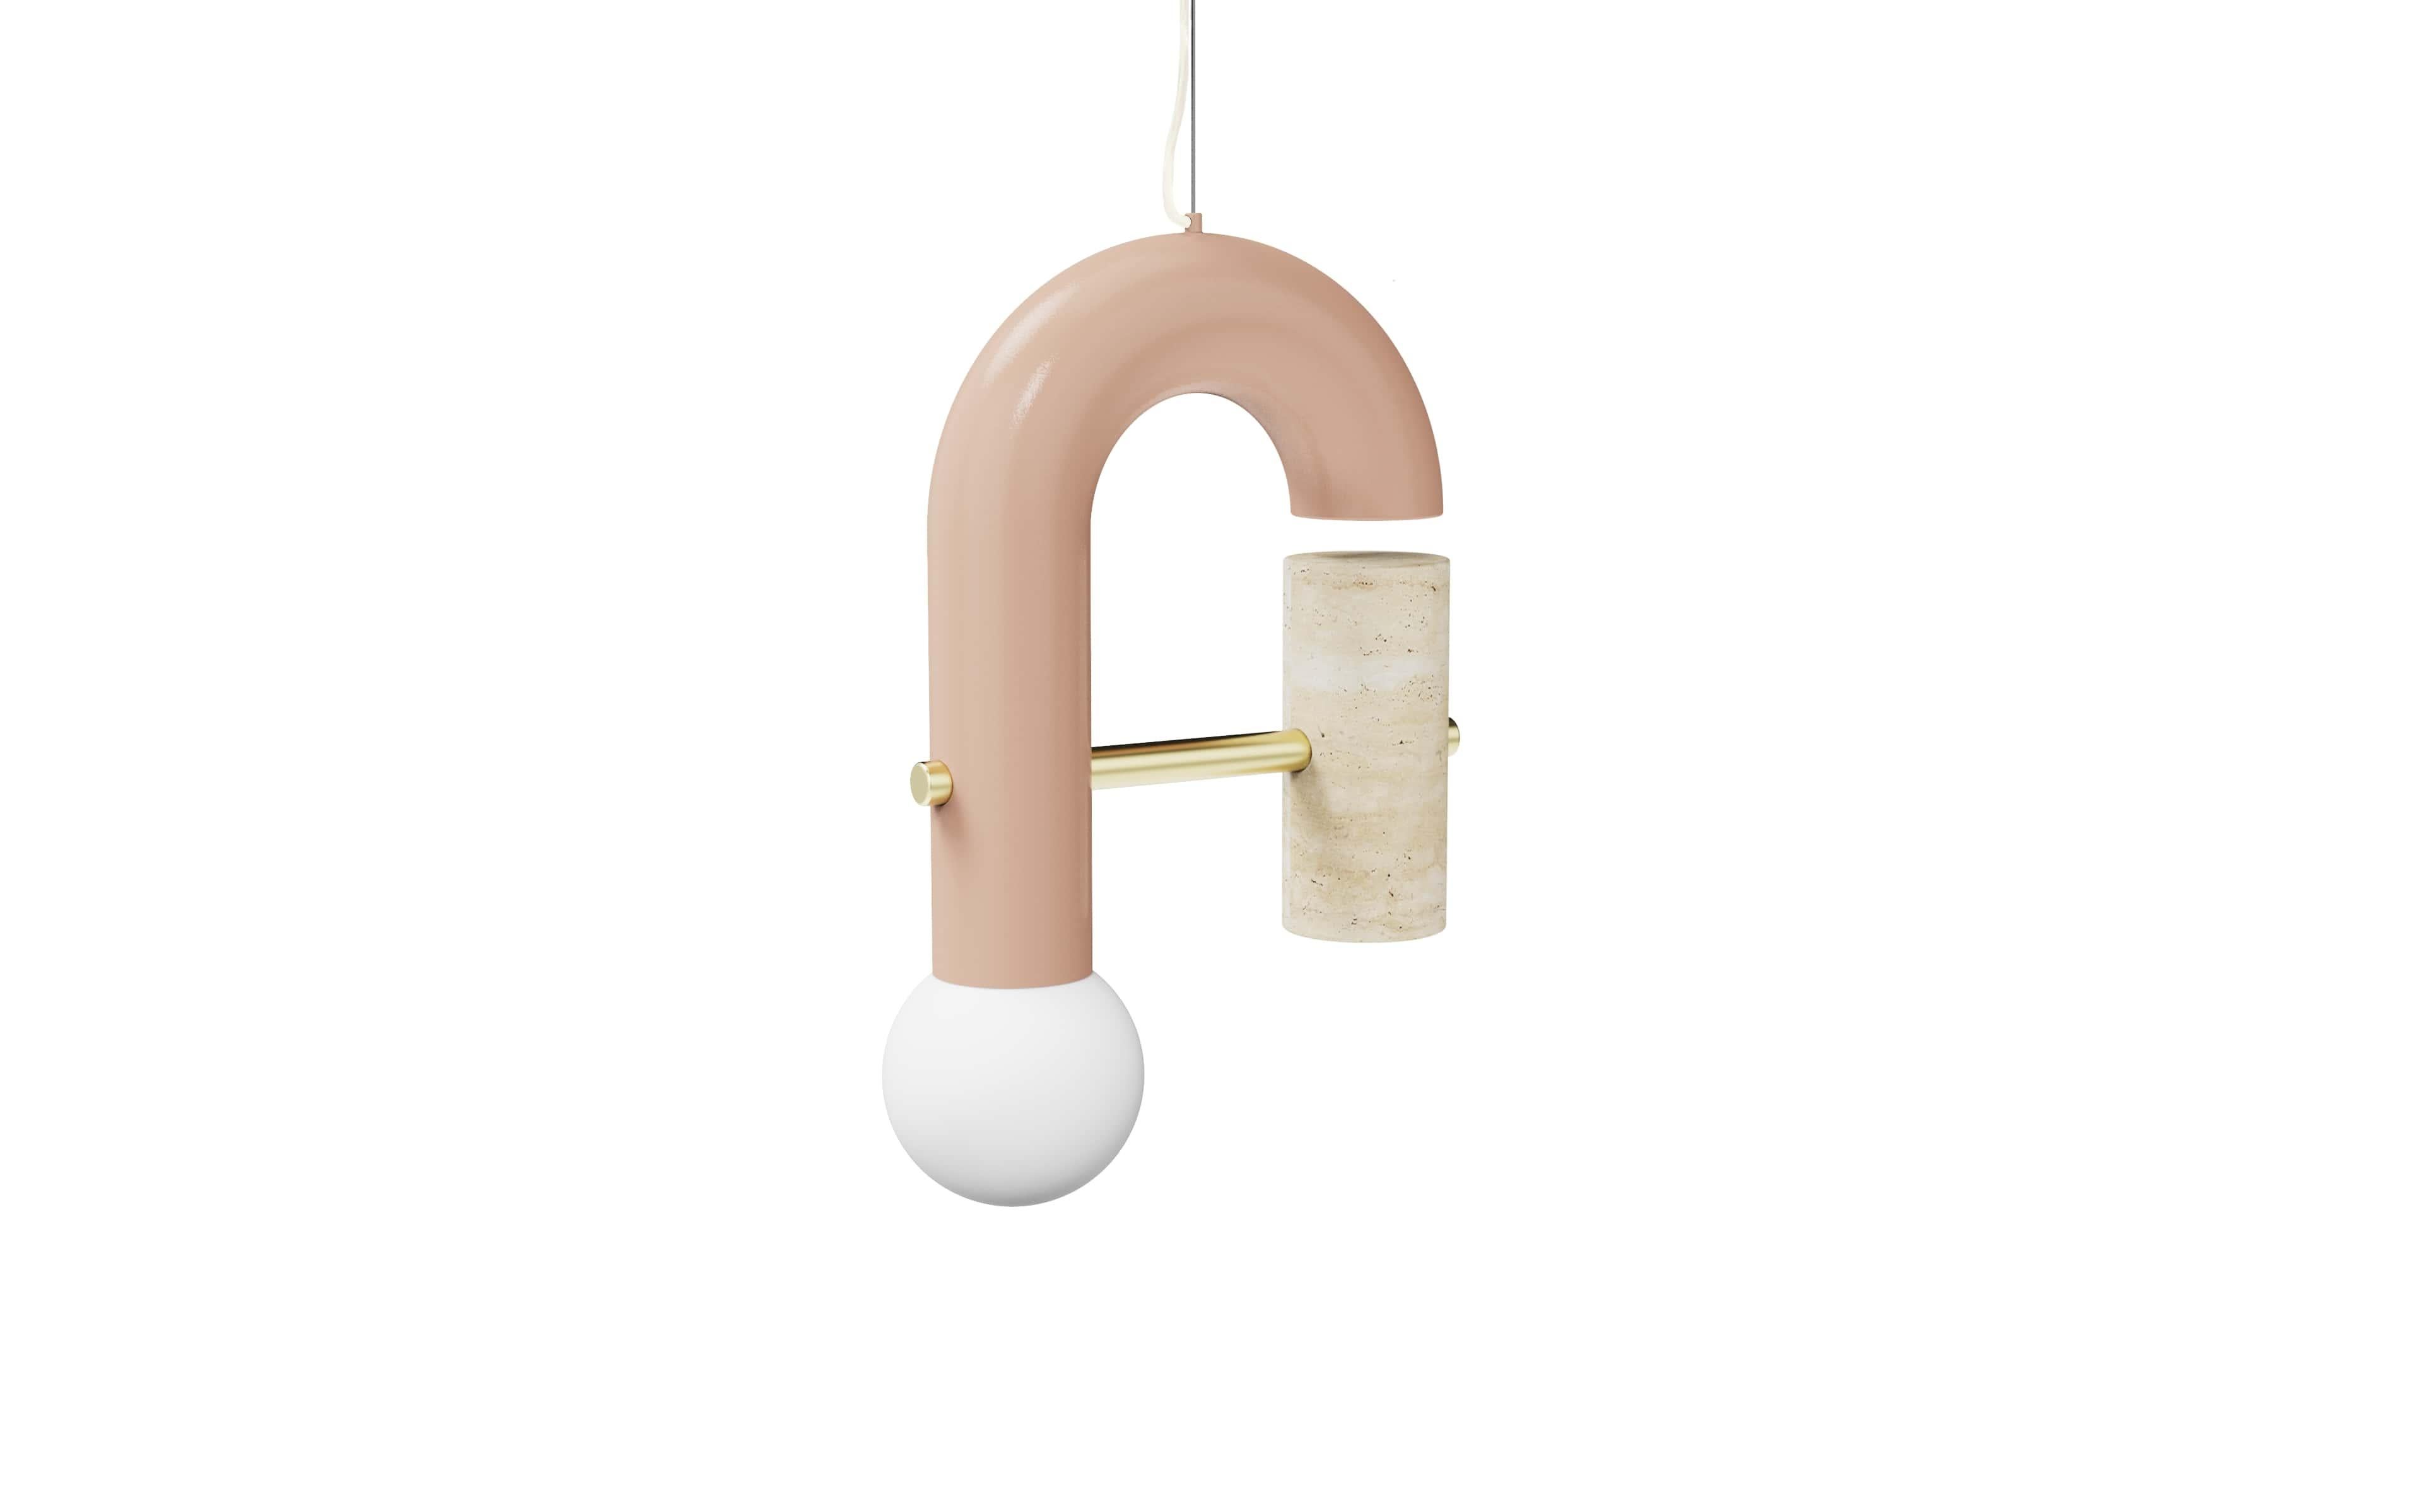 Pyppe single II lamp by Utu Lamps
Dimensions: 39 x 26 x 12 cm
Materials: Lacquered metal, brass, nickel/copper, travertine

All our lamps can be wired according to each country. If sold to the USA it will be wired for the USA for instance.

Dooq is